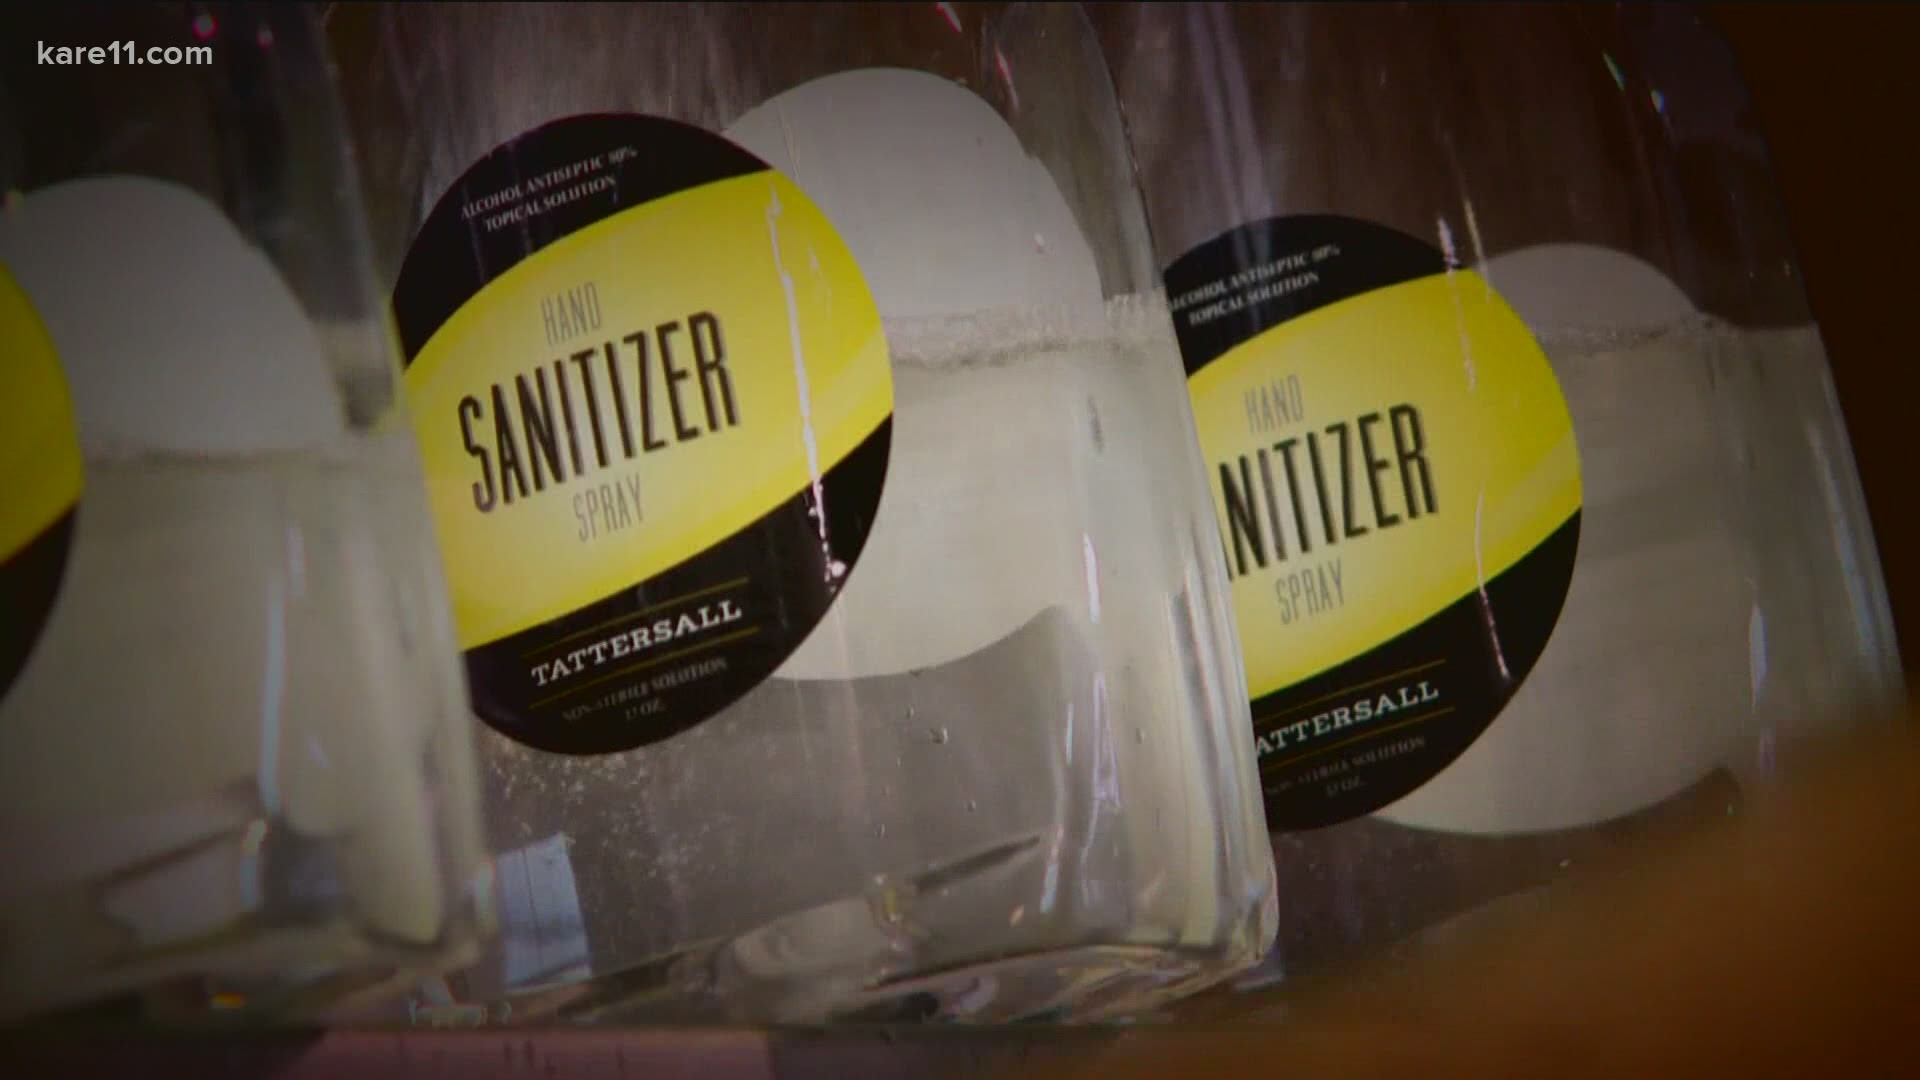 Despite stepping up to help produce hand sanitizer this spring, local distilleries were told by the FDA to pay up this week